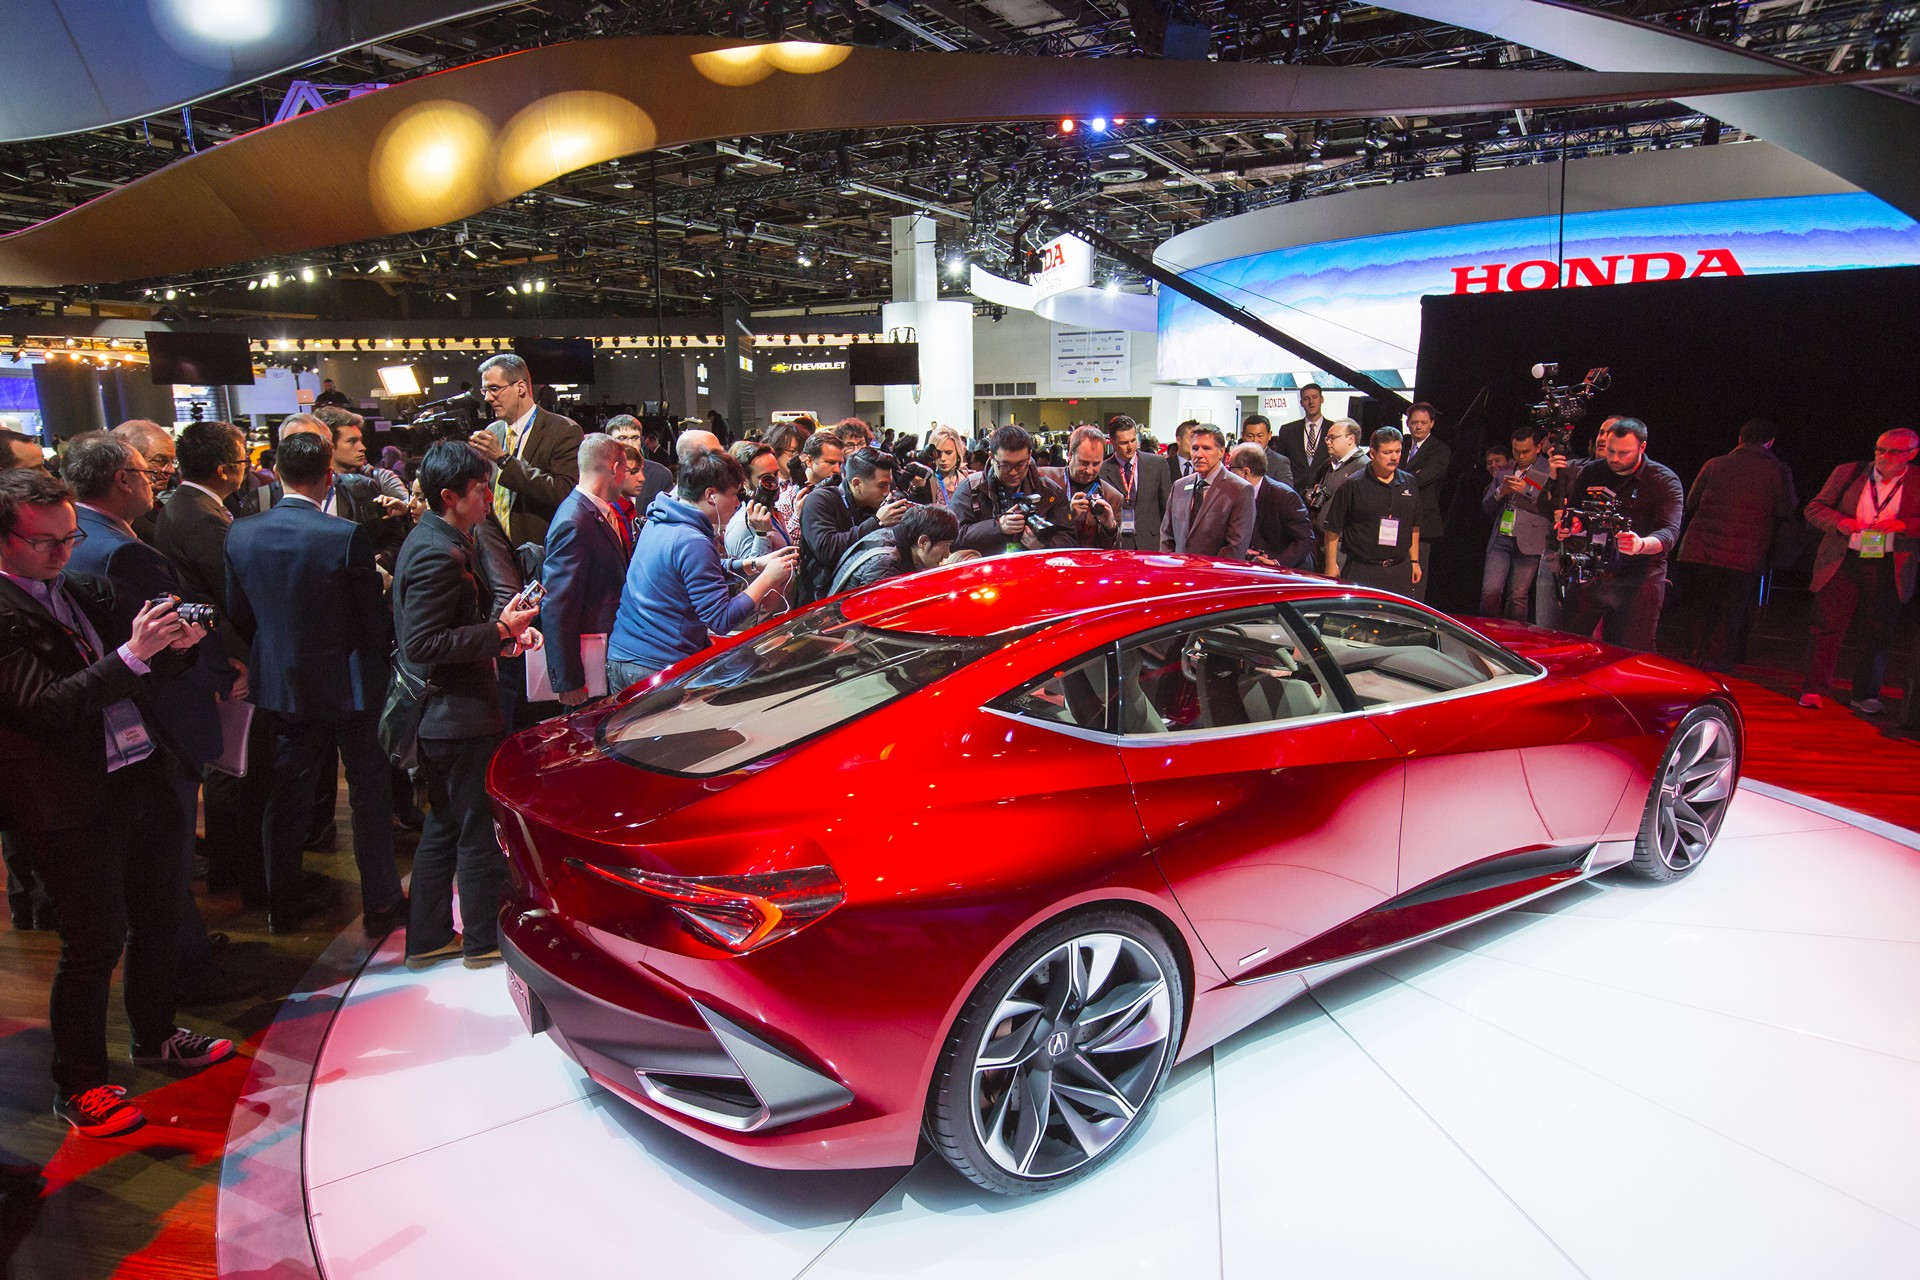 The Acura Precision Concept at its 2016 North American International Auto Show unveiling in Detroit © Honda Motor Co. Ltd.